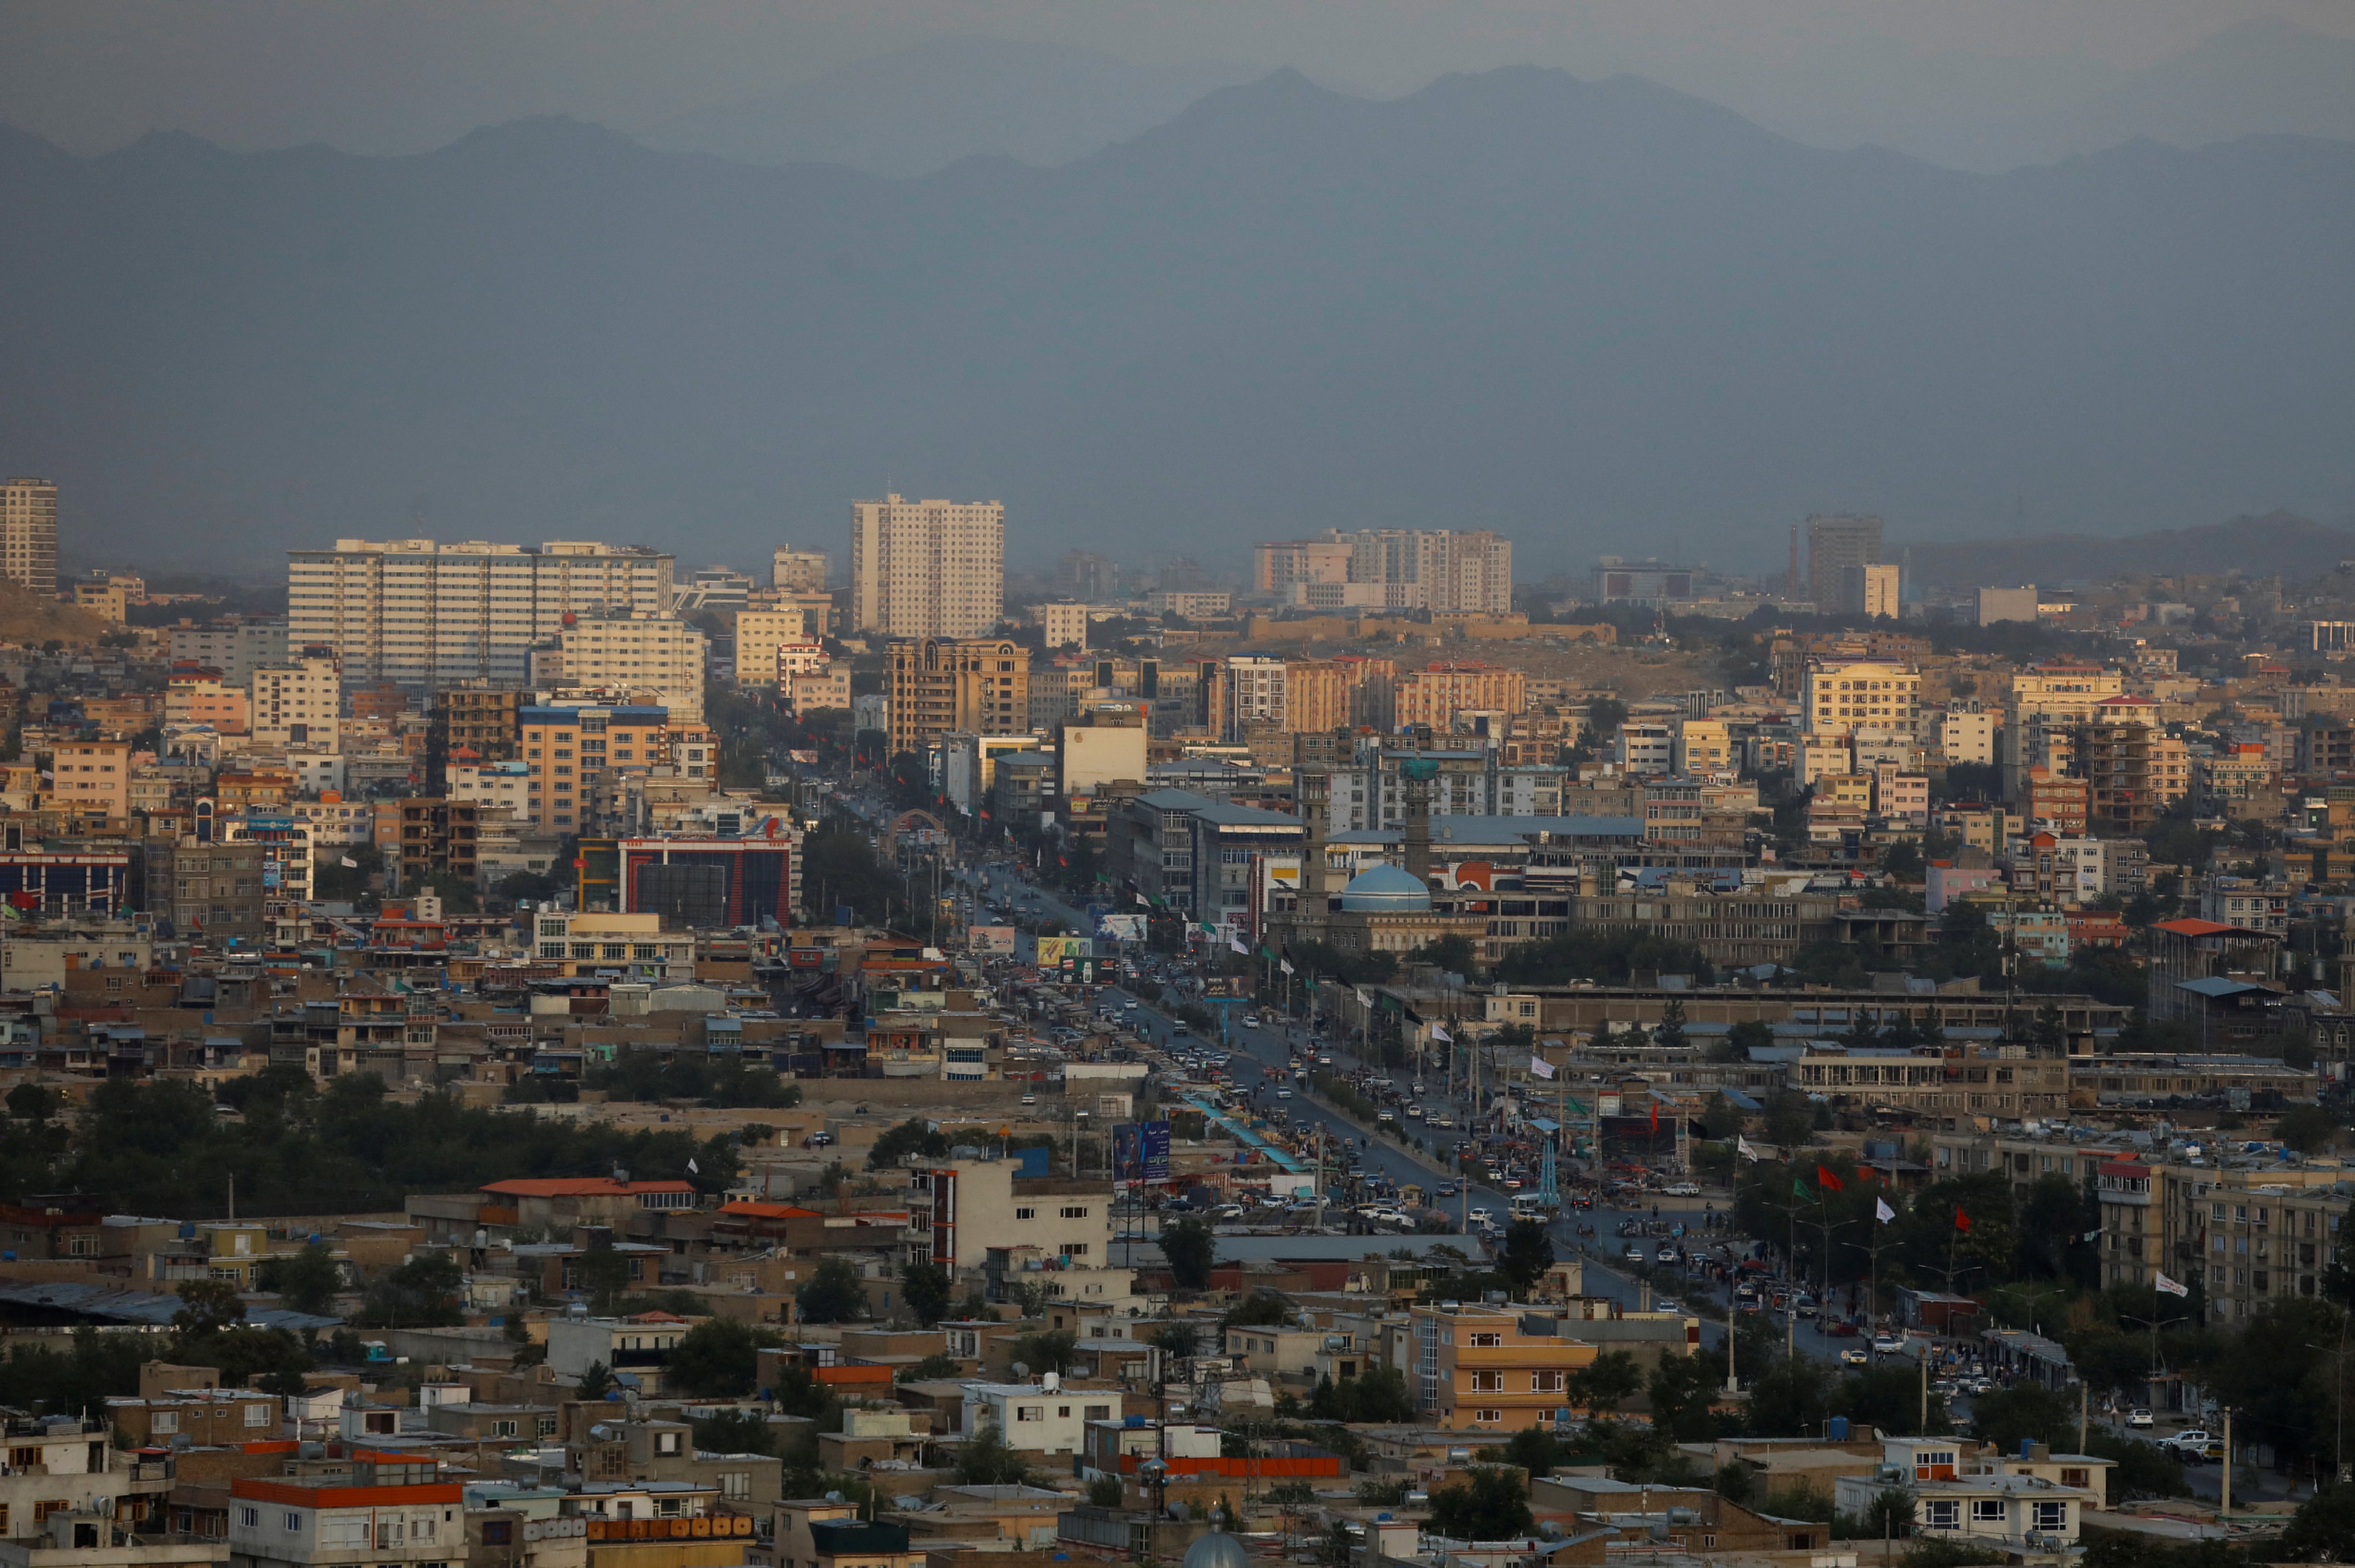 A general view of the city of Kabul, Afghanistan